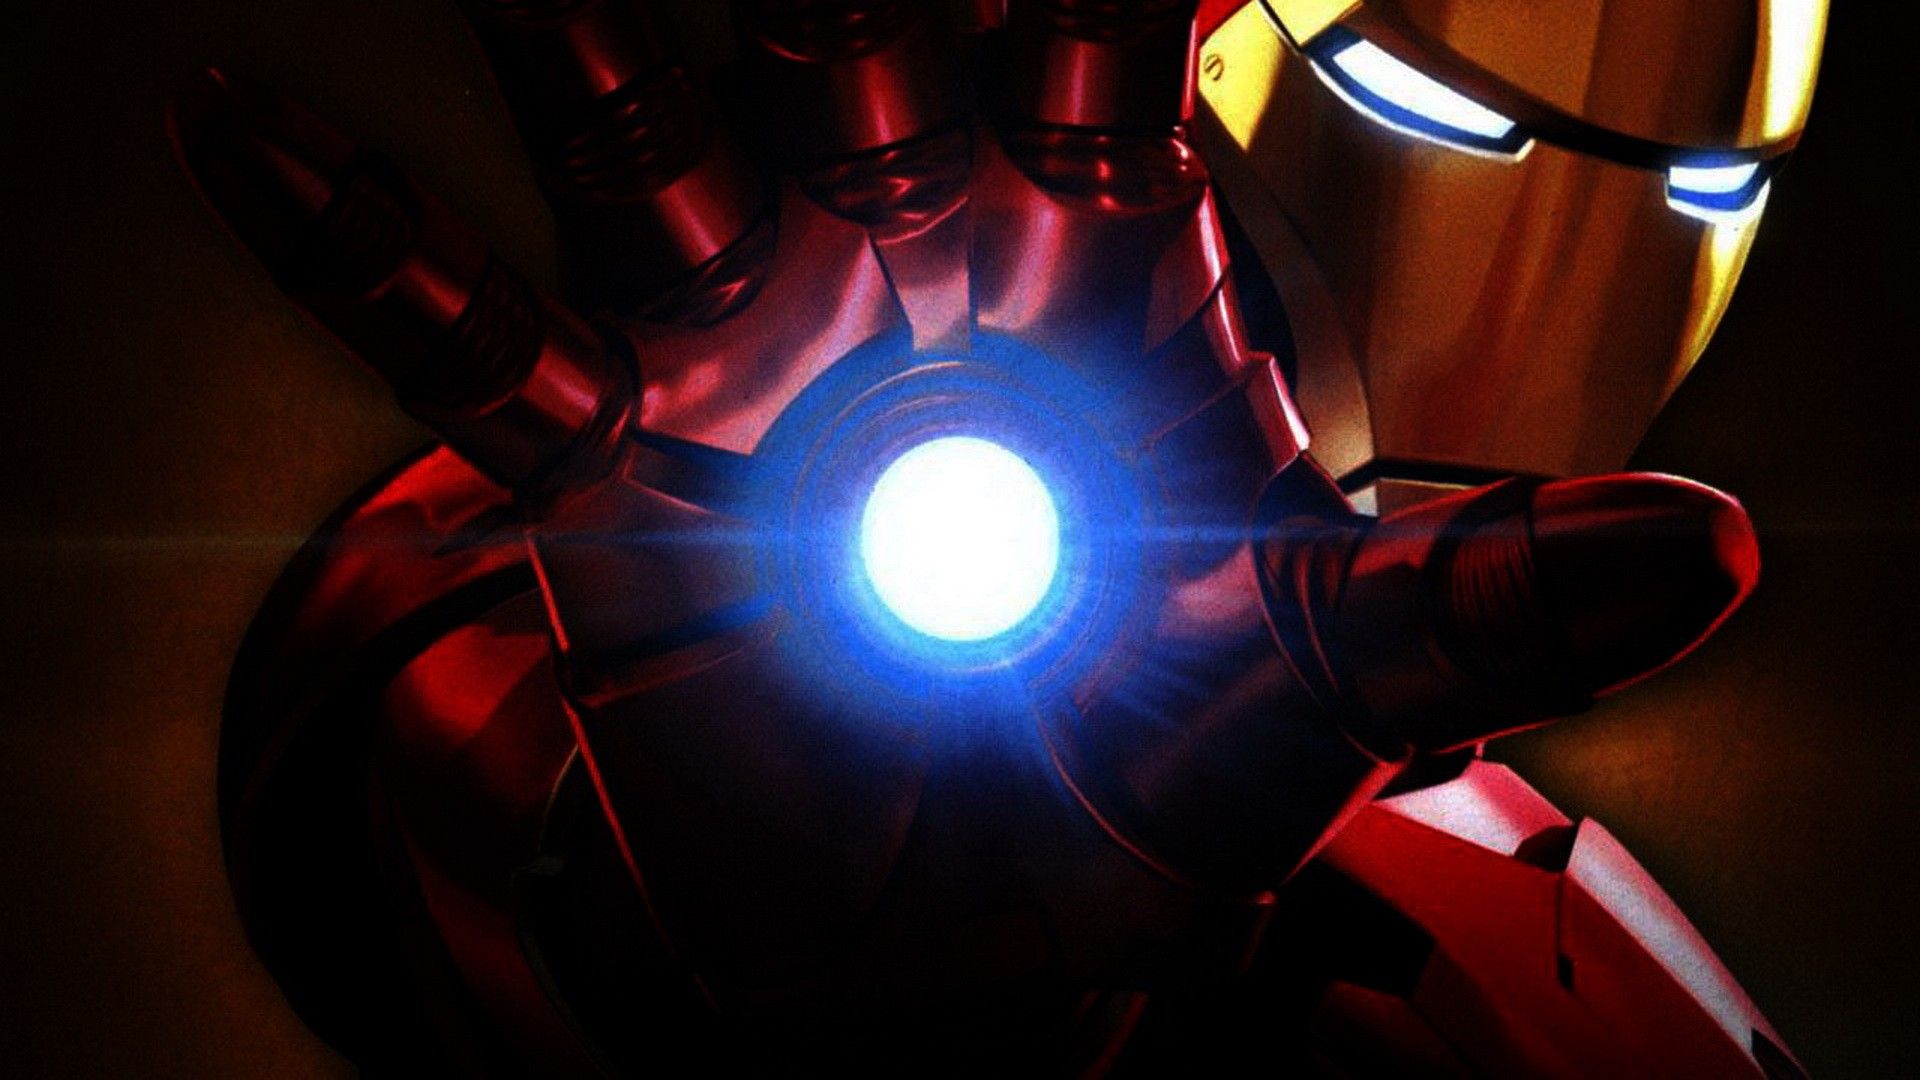 Iron Man Cool Backgrounds Wallpapers 4482 - HD Wallpapers Site